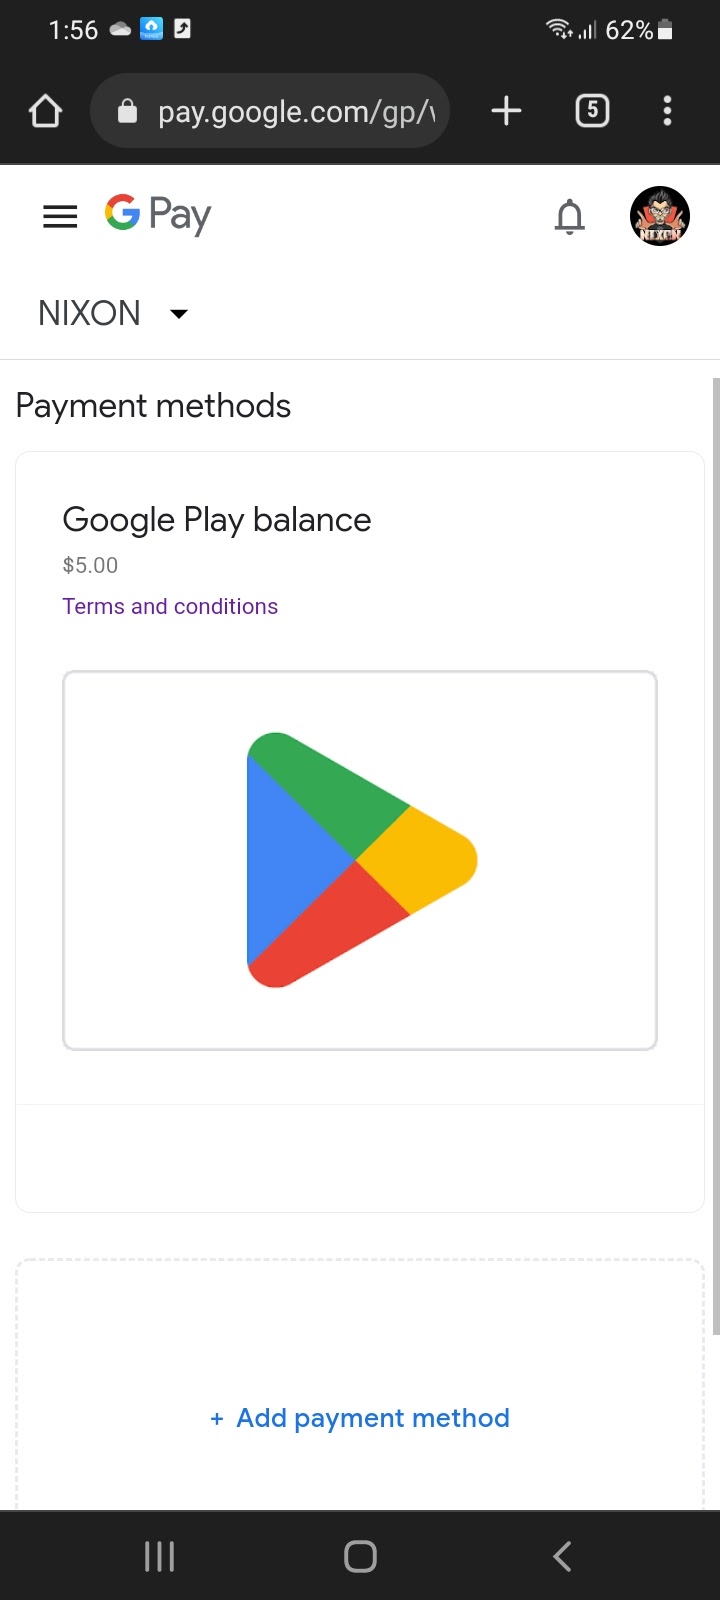 Can't log in with Google play games - Google Play Community